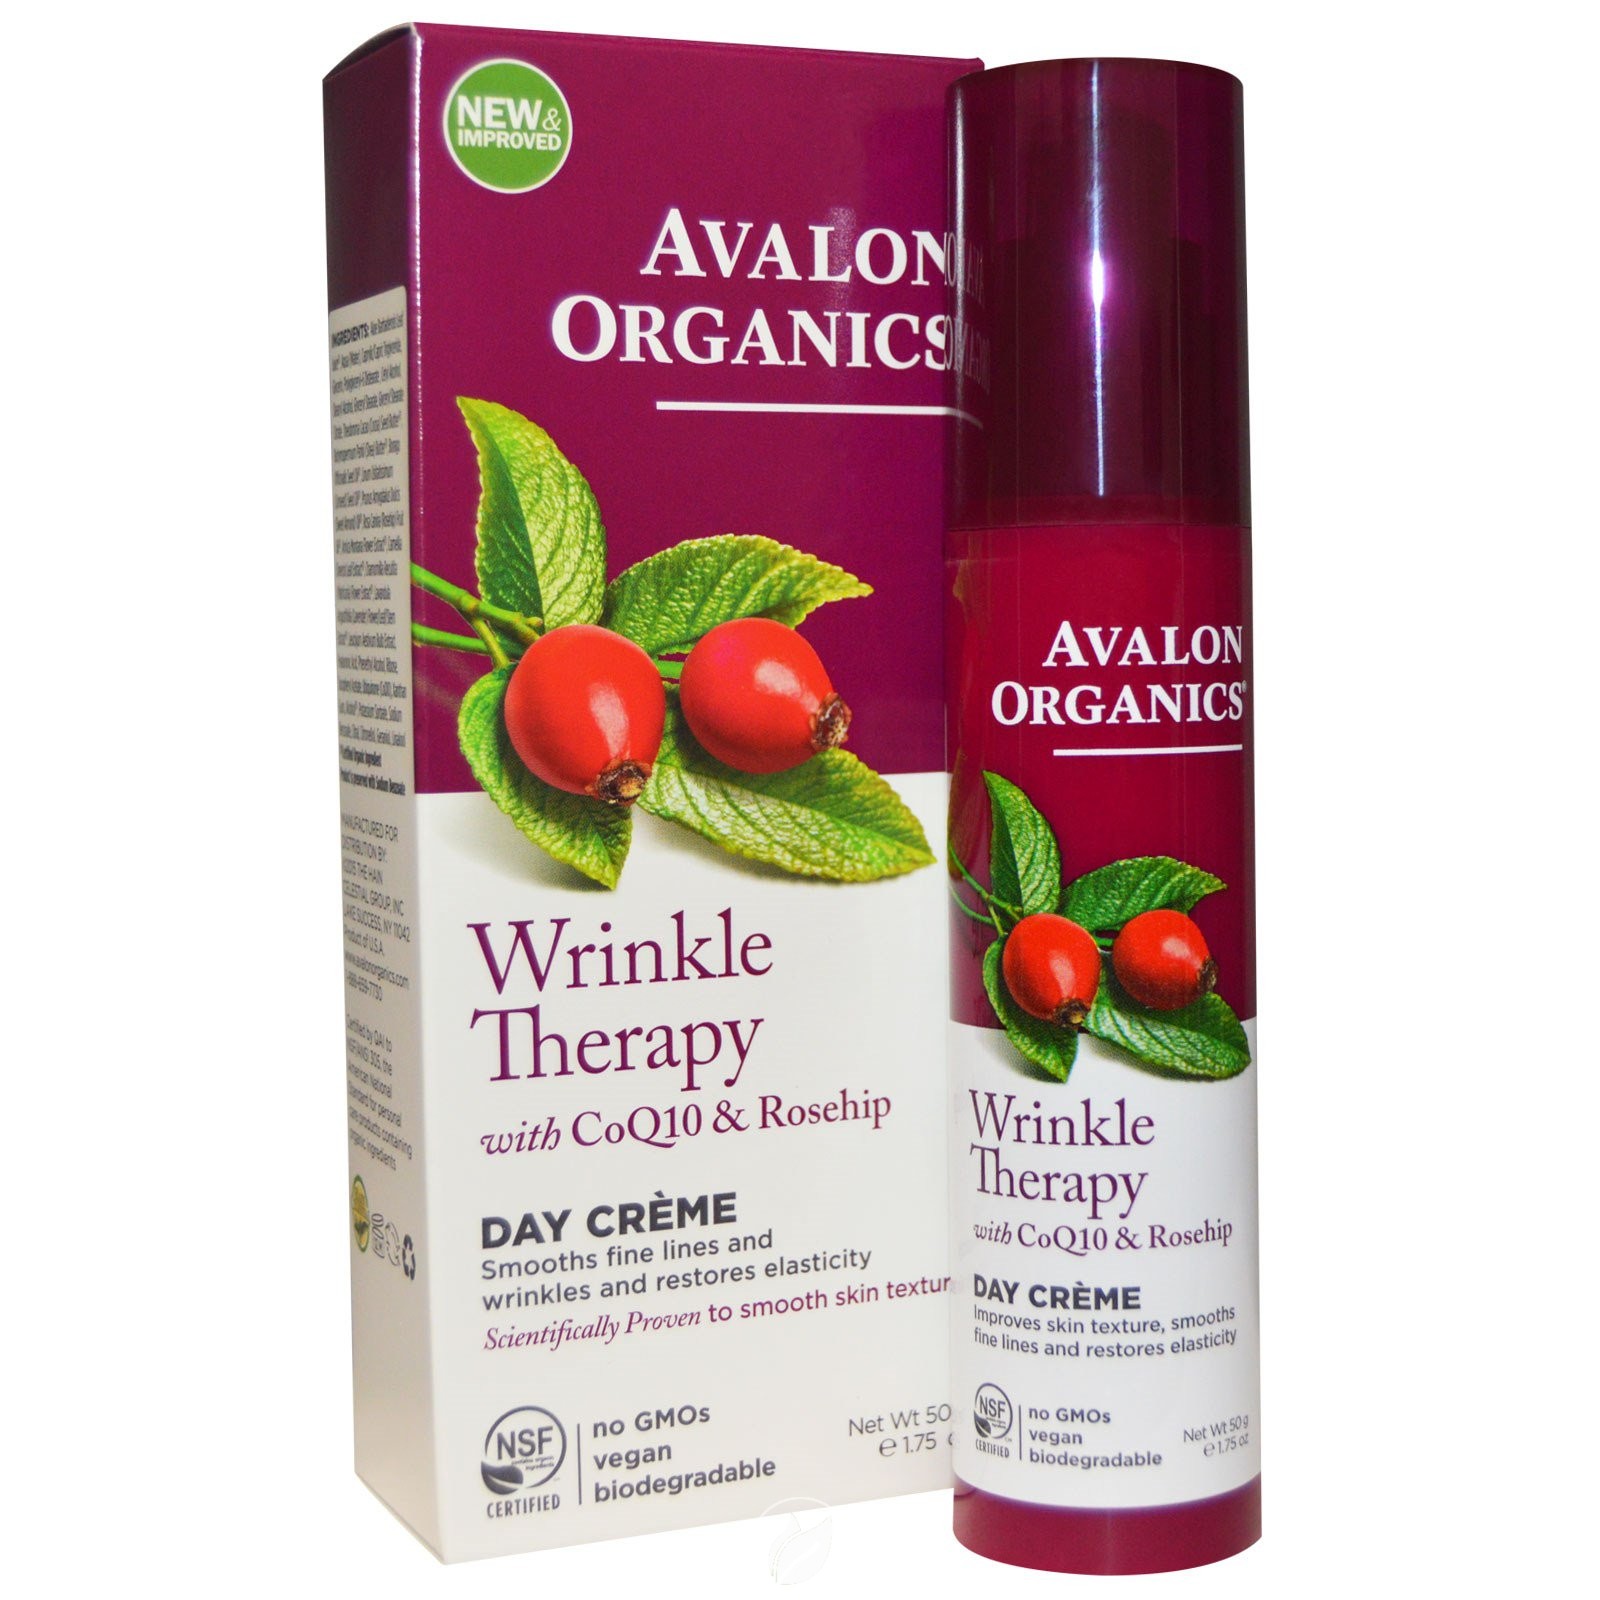 Avalon Organic Botanicals Wrinkle Therapy Day Creme 1.75 Ounce - image 1 of 2